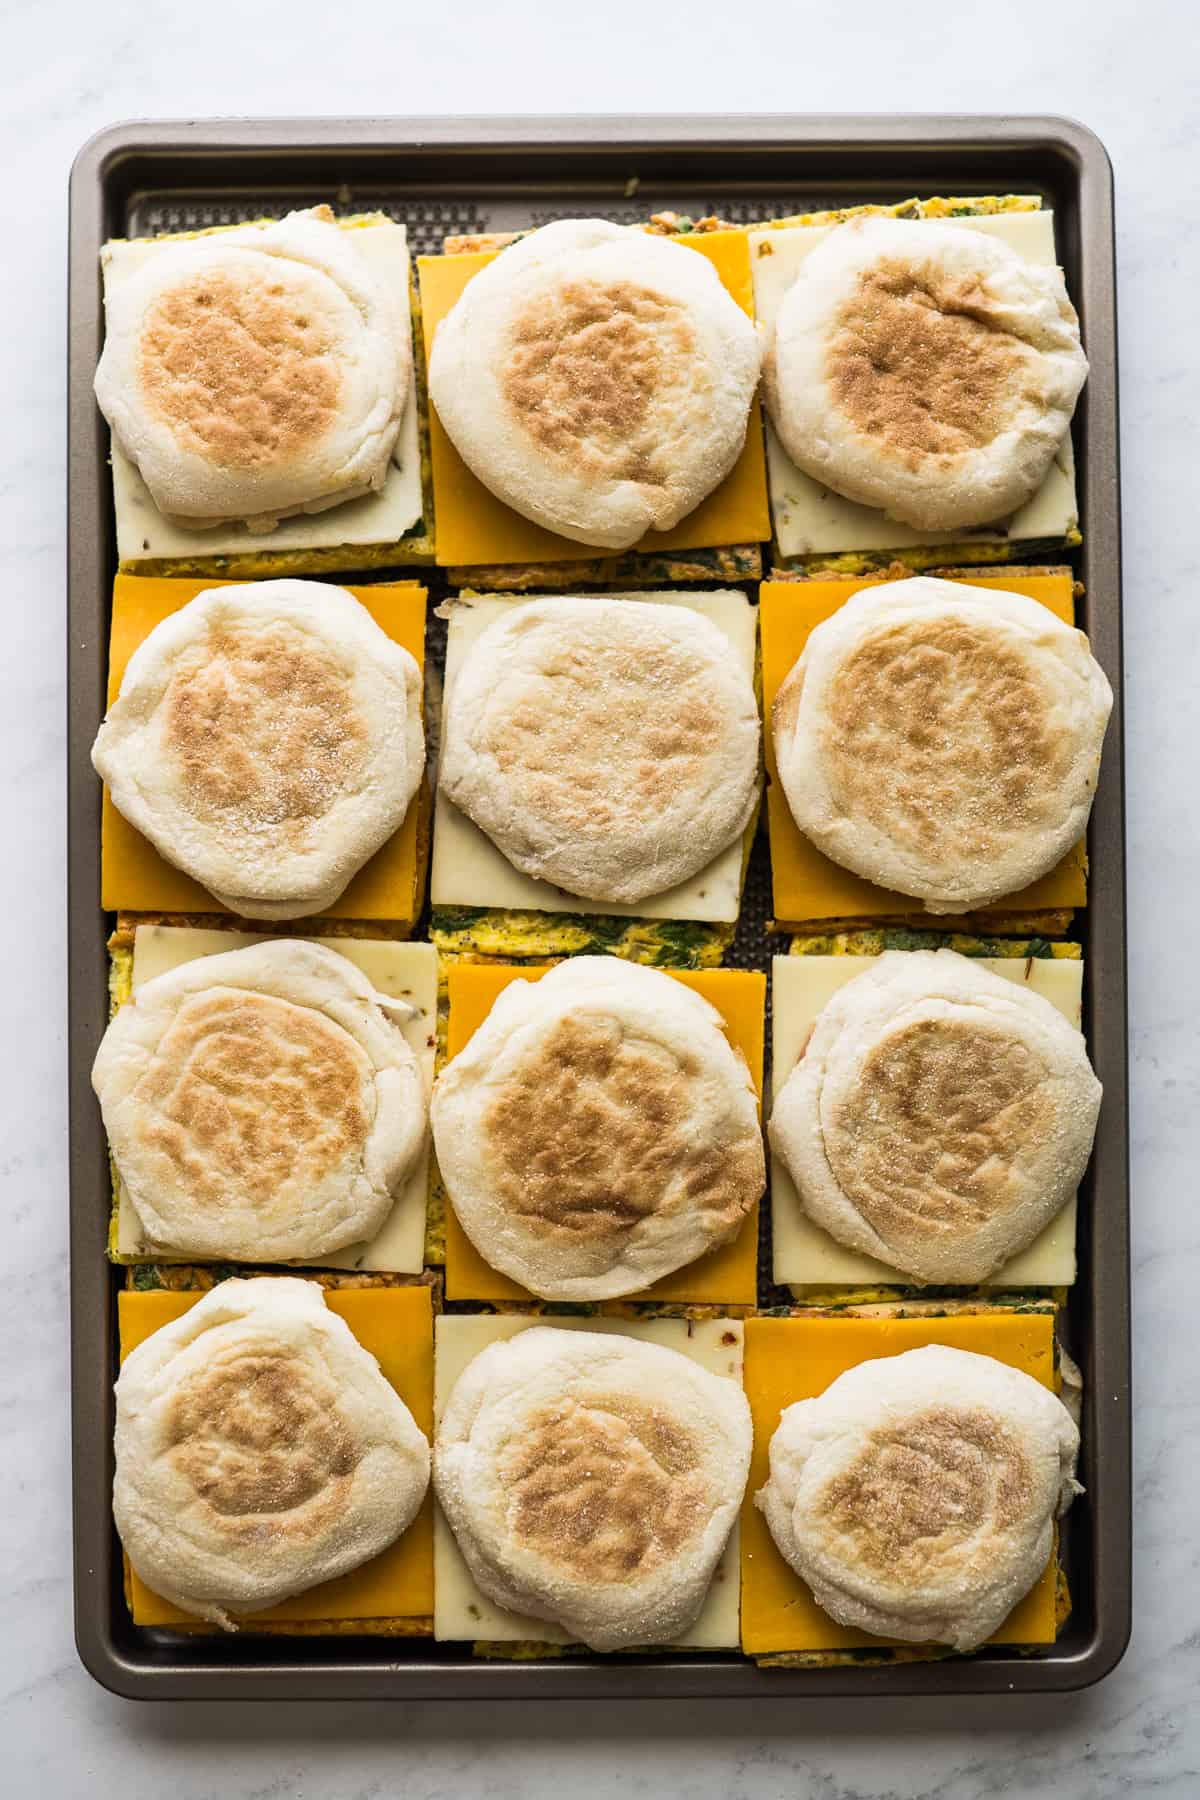 12 breakfast sandwiches on a sheet pan ready to be served or wrapped and frozen.